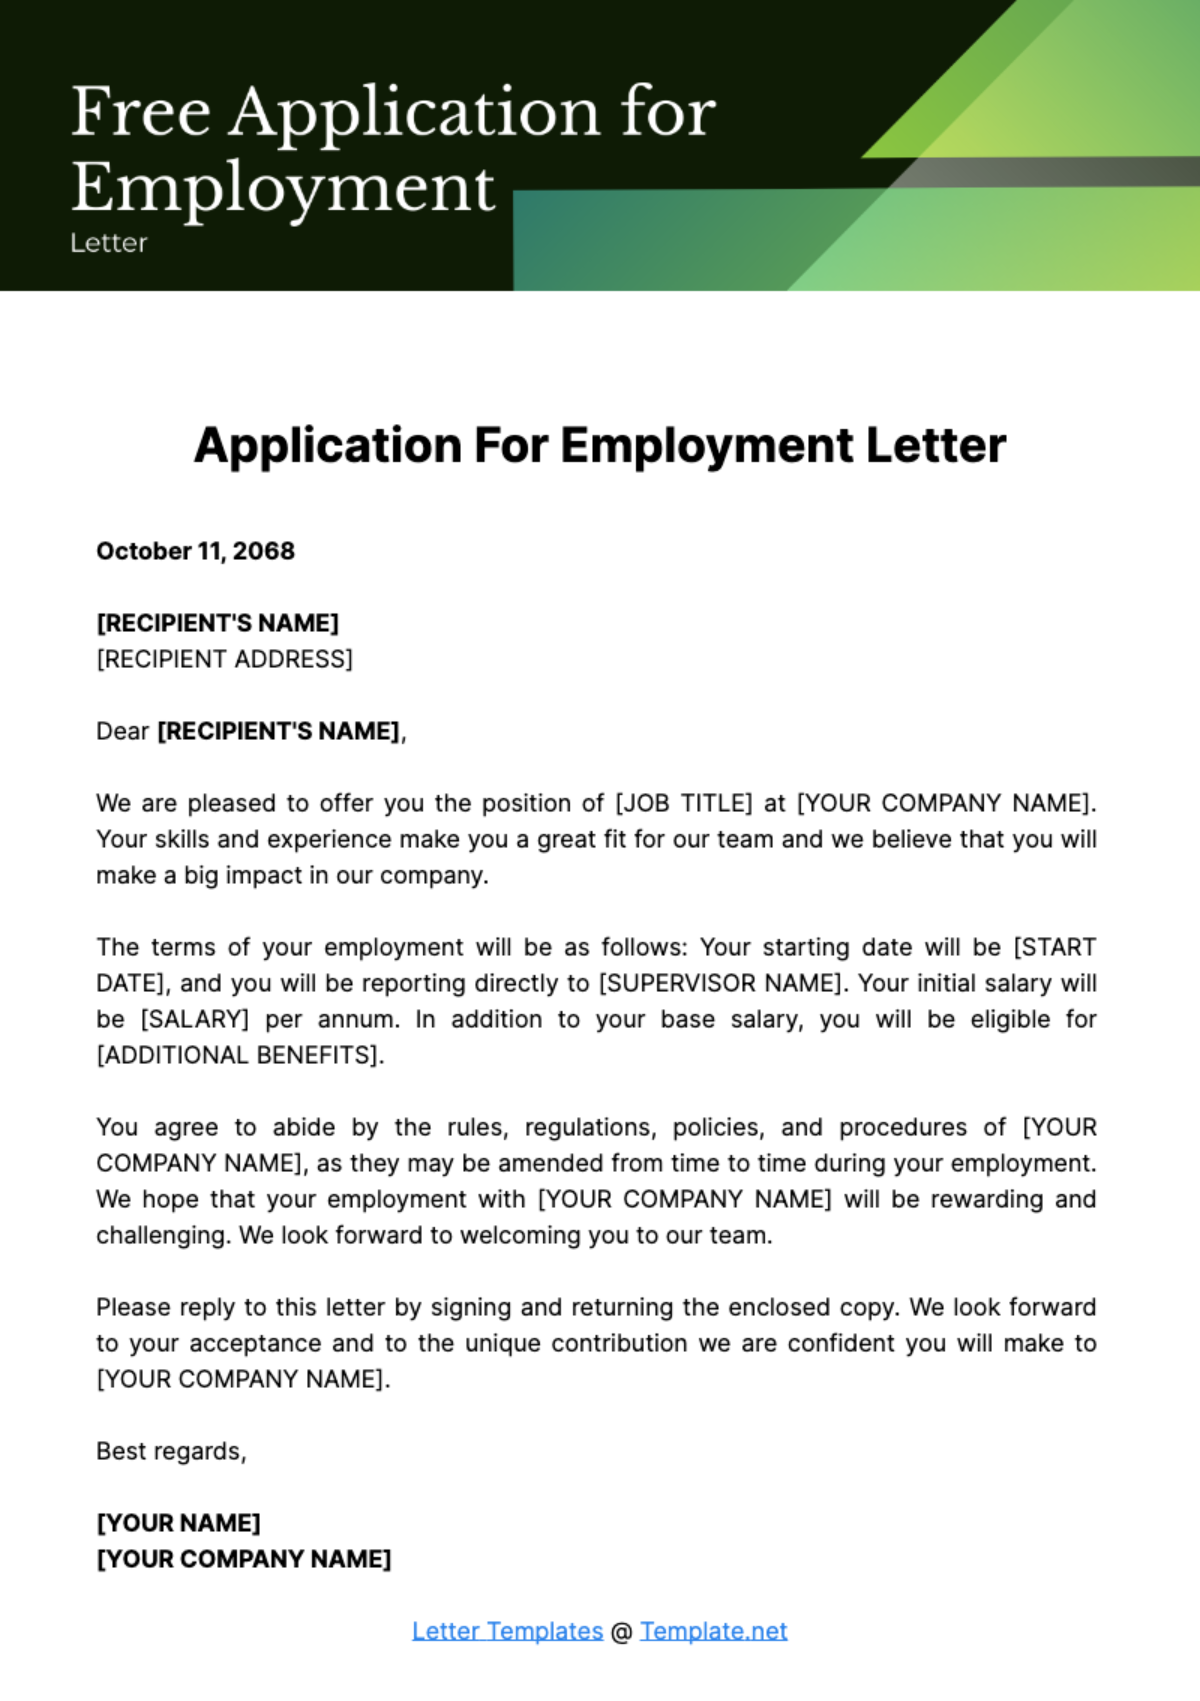 Free Application for Employment Letter Template